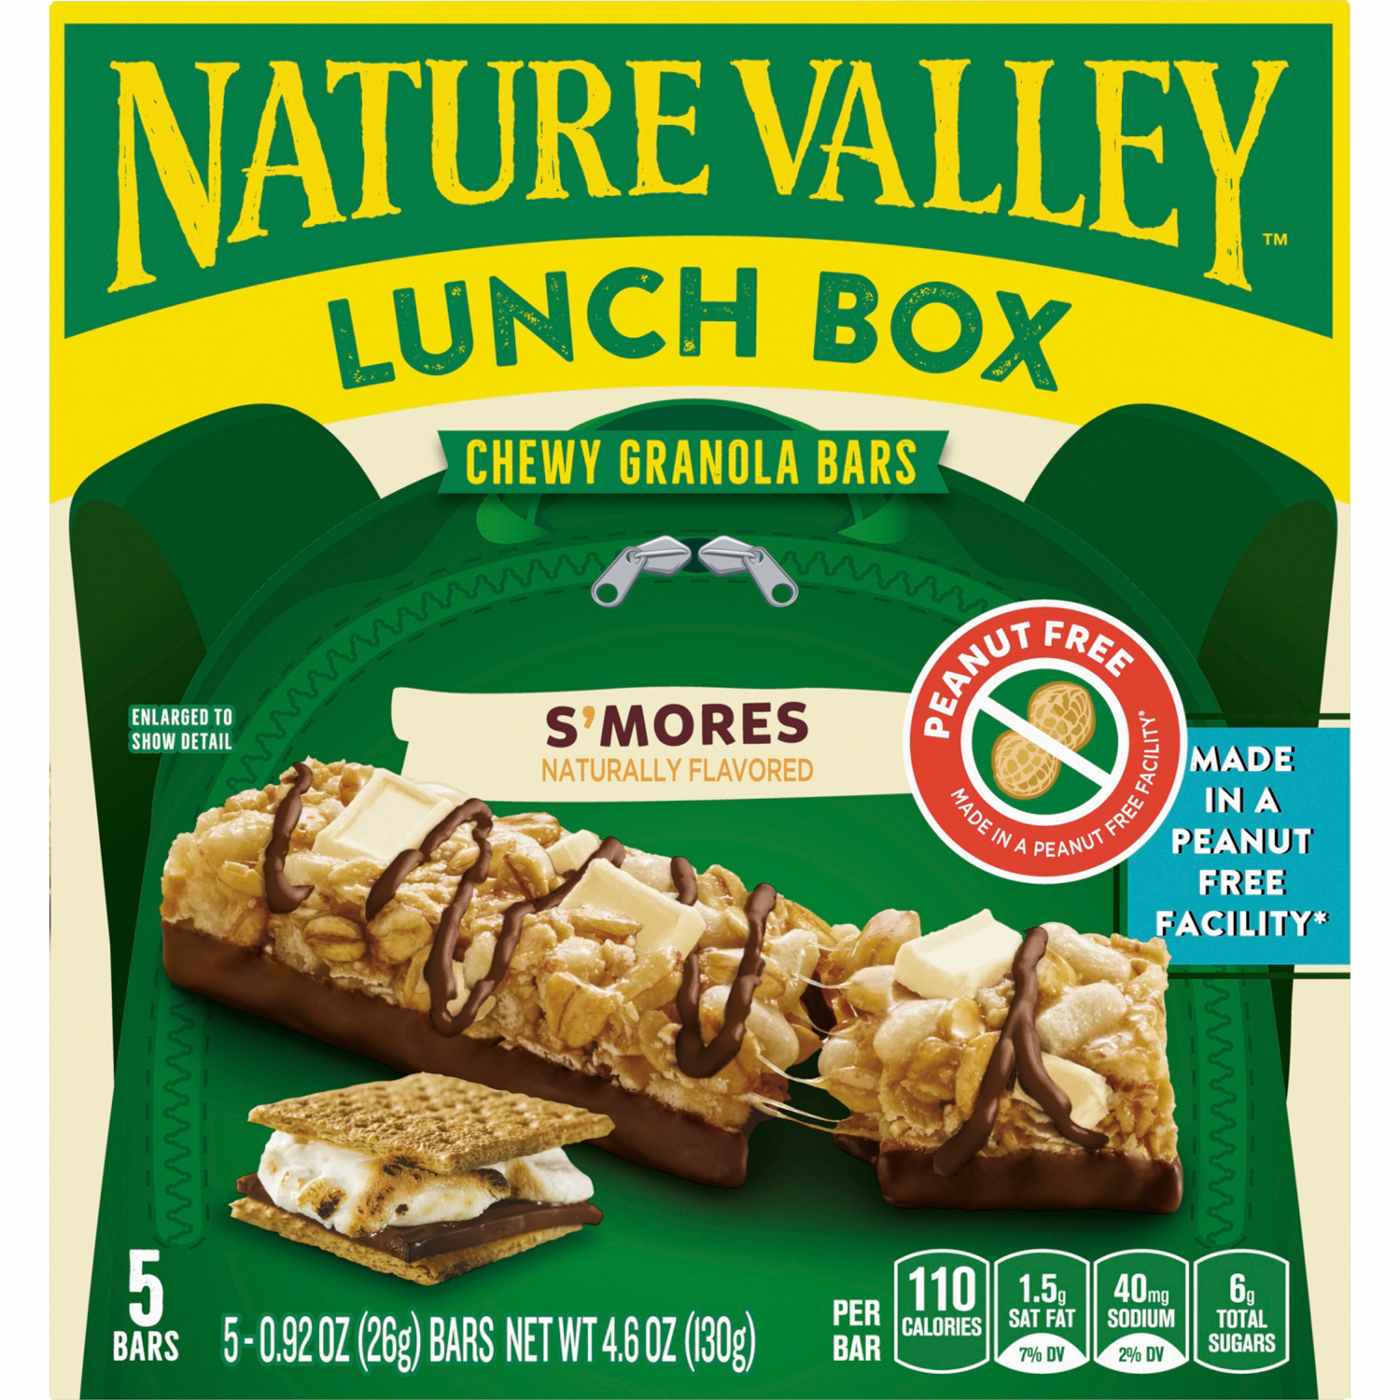 Nature Valley Lunch Box S'mores Chewy Granola Bars; image 1 of 3